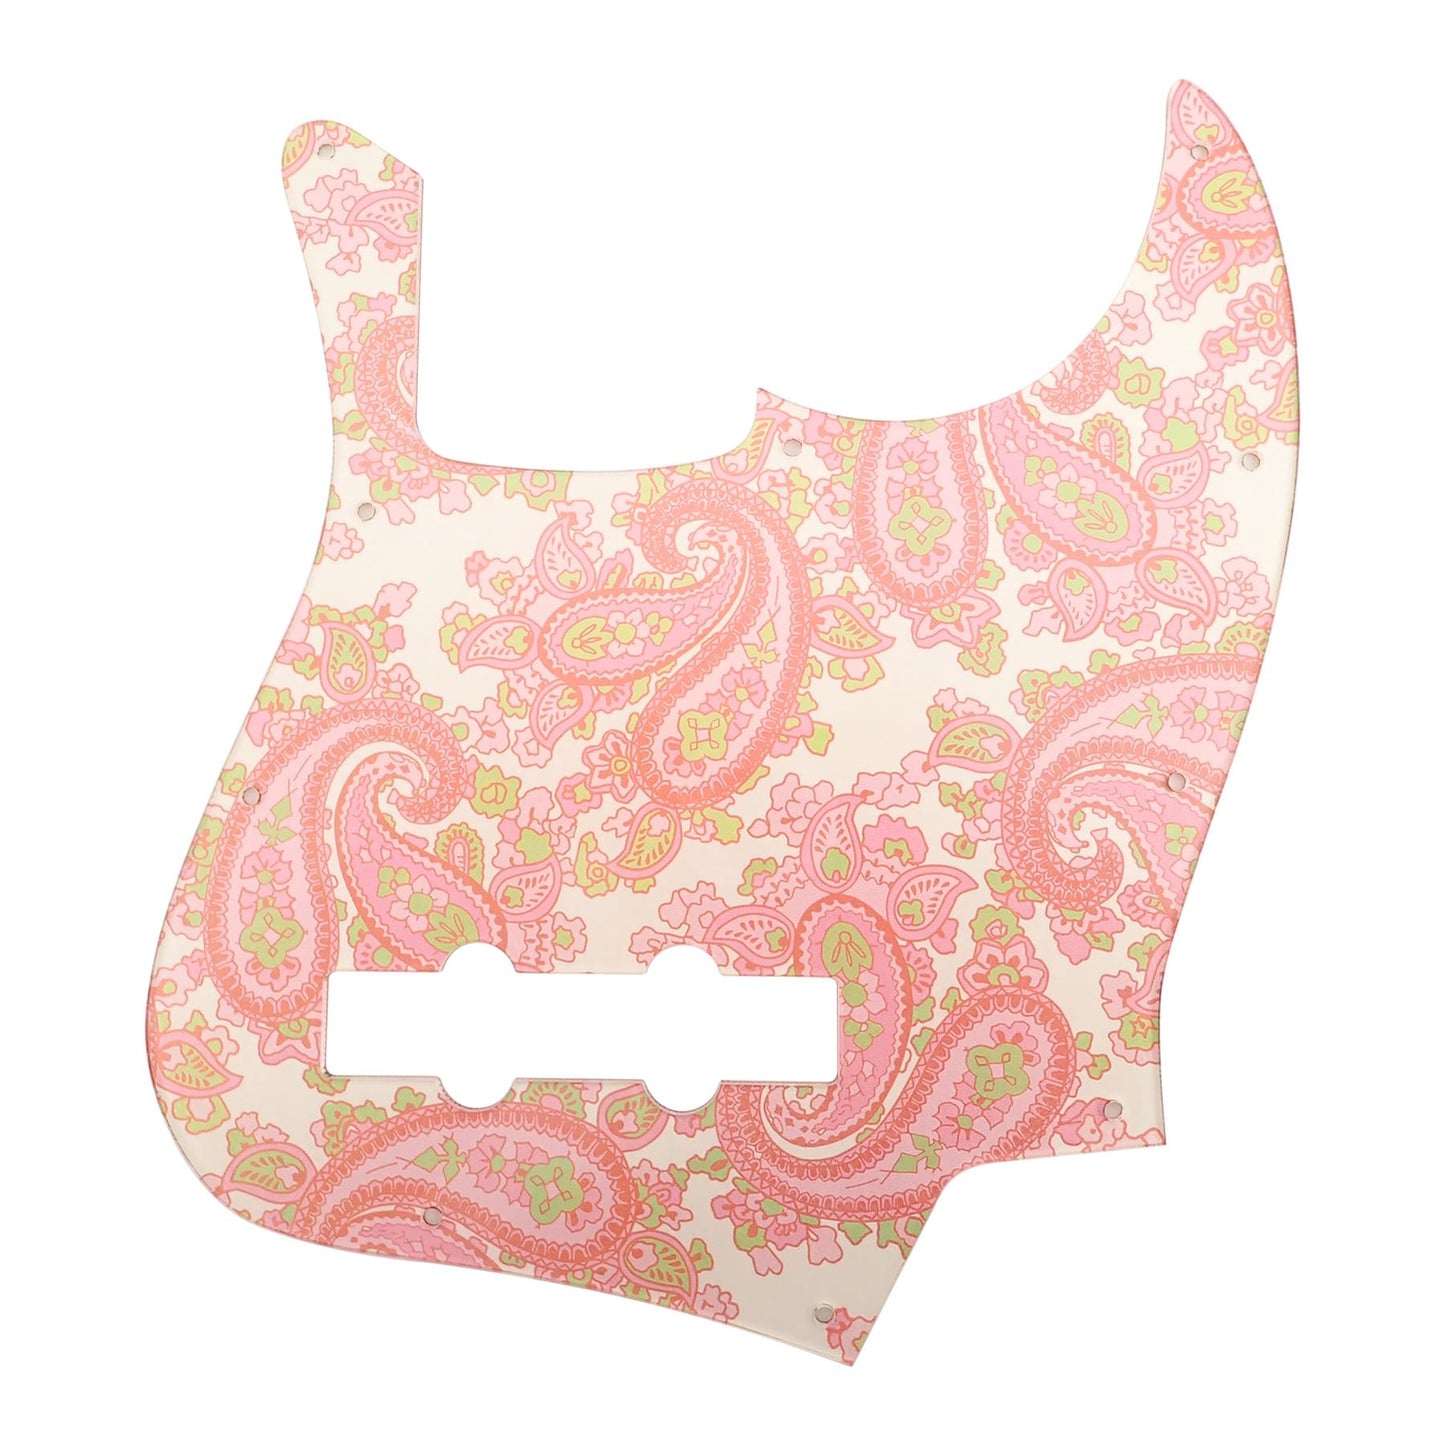 Luthitec Pearl Gold Backed Pink Paisley Acrylic Jazz Bass Guitar Pickguard